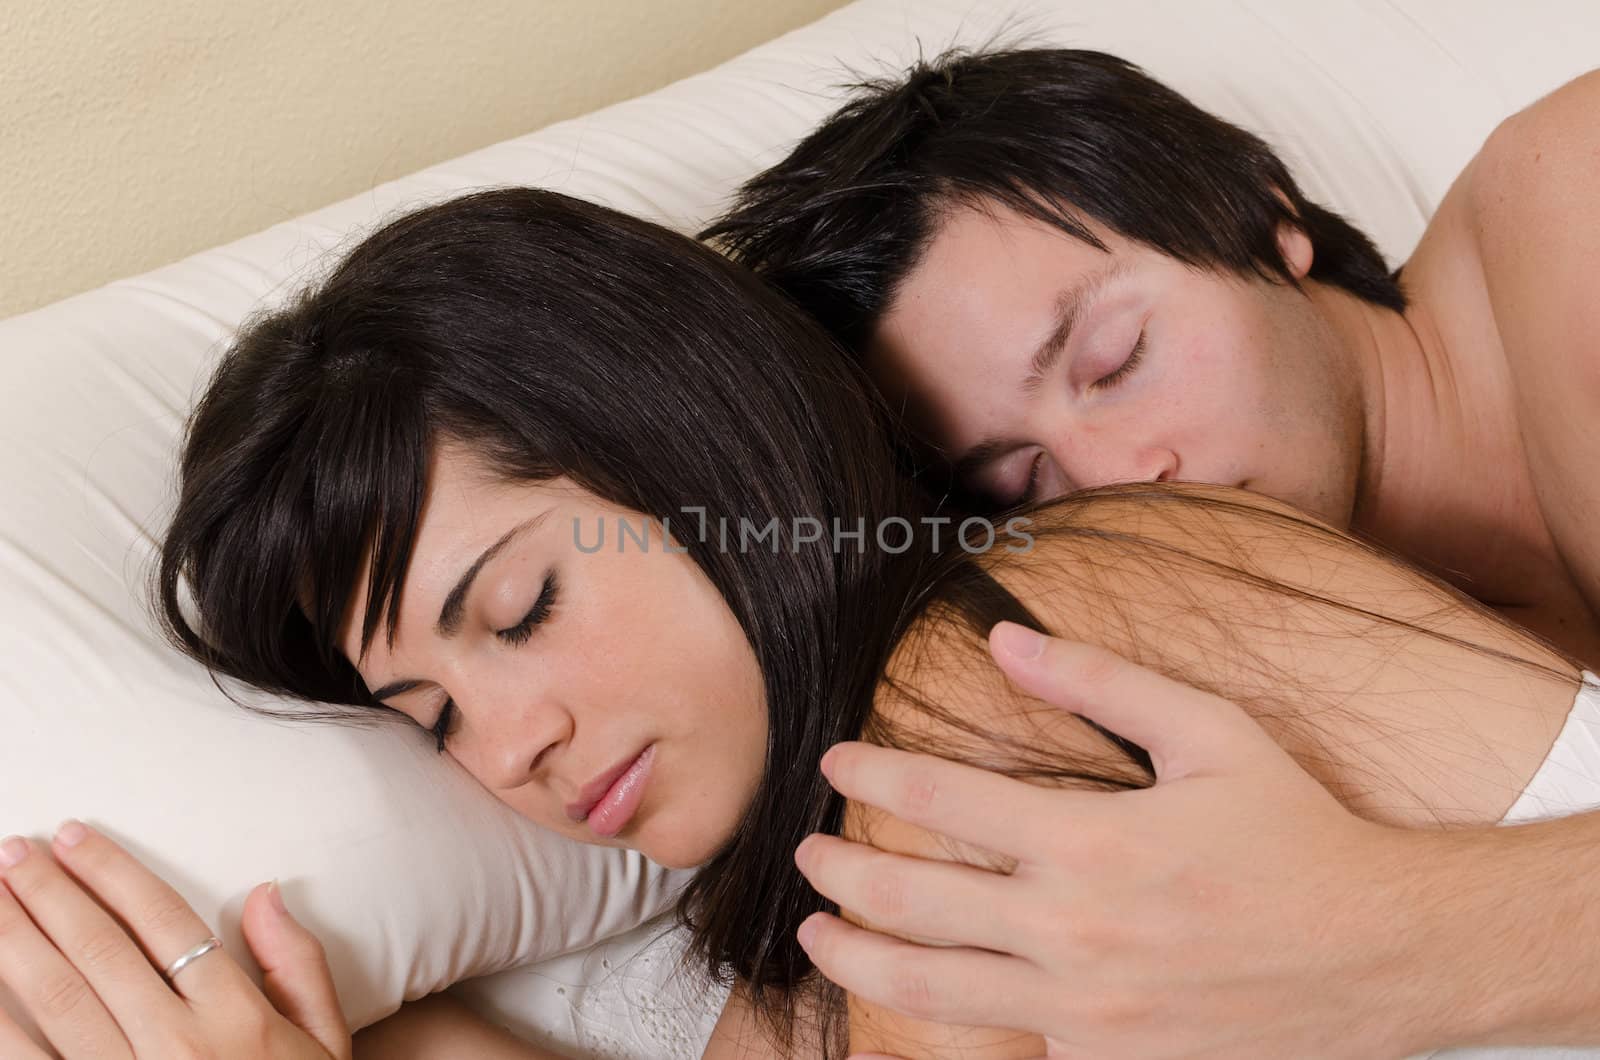 Couple in their 20s relaxed and sleeping in an embrace